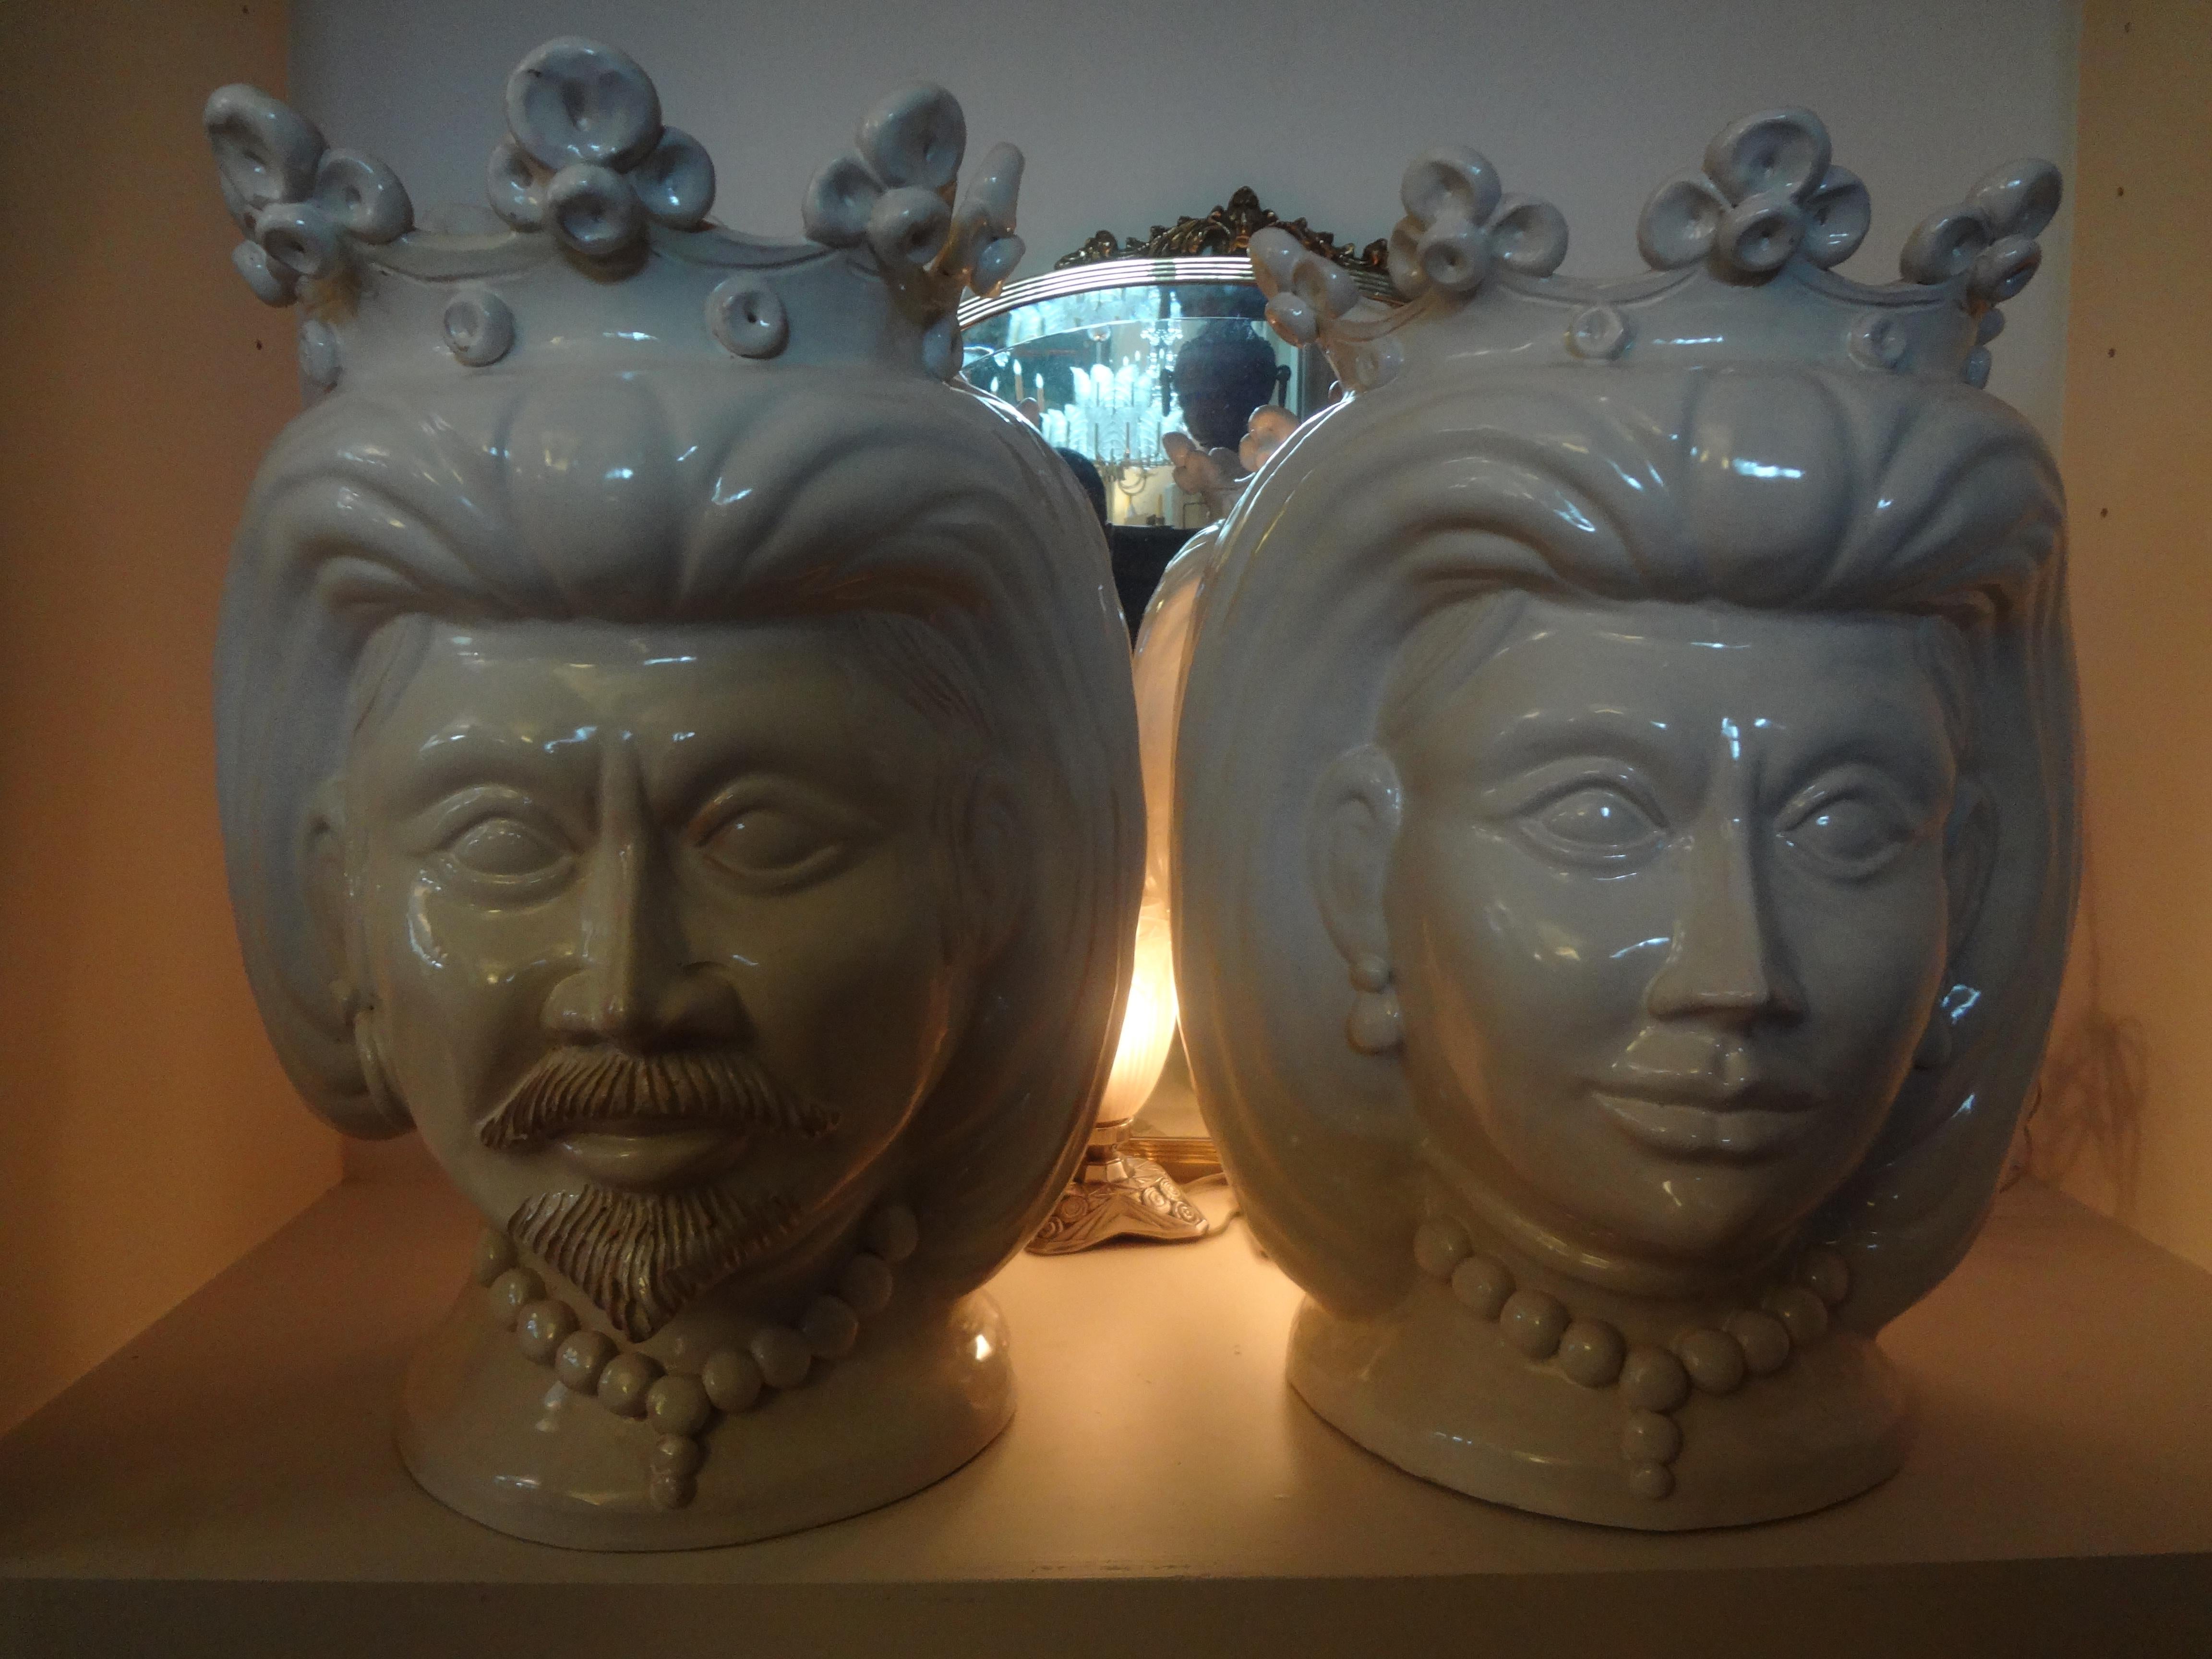 Monumental Pair of 20th century of Italian Glazed Terracotta Bust Jardinières.
Exceptionally large pair of 20th century Italian white glazed terracotta busts, head jardinières, planters, one a woman, the other a man. This stunning pair of